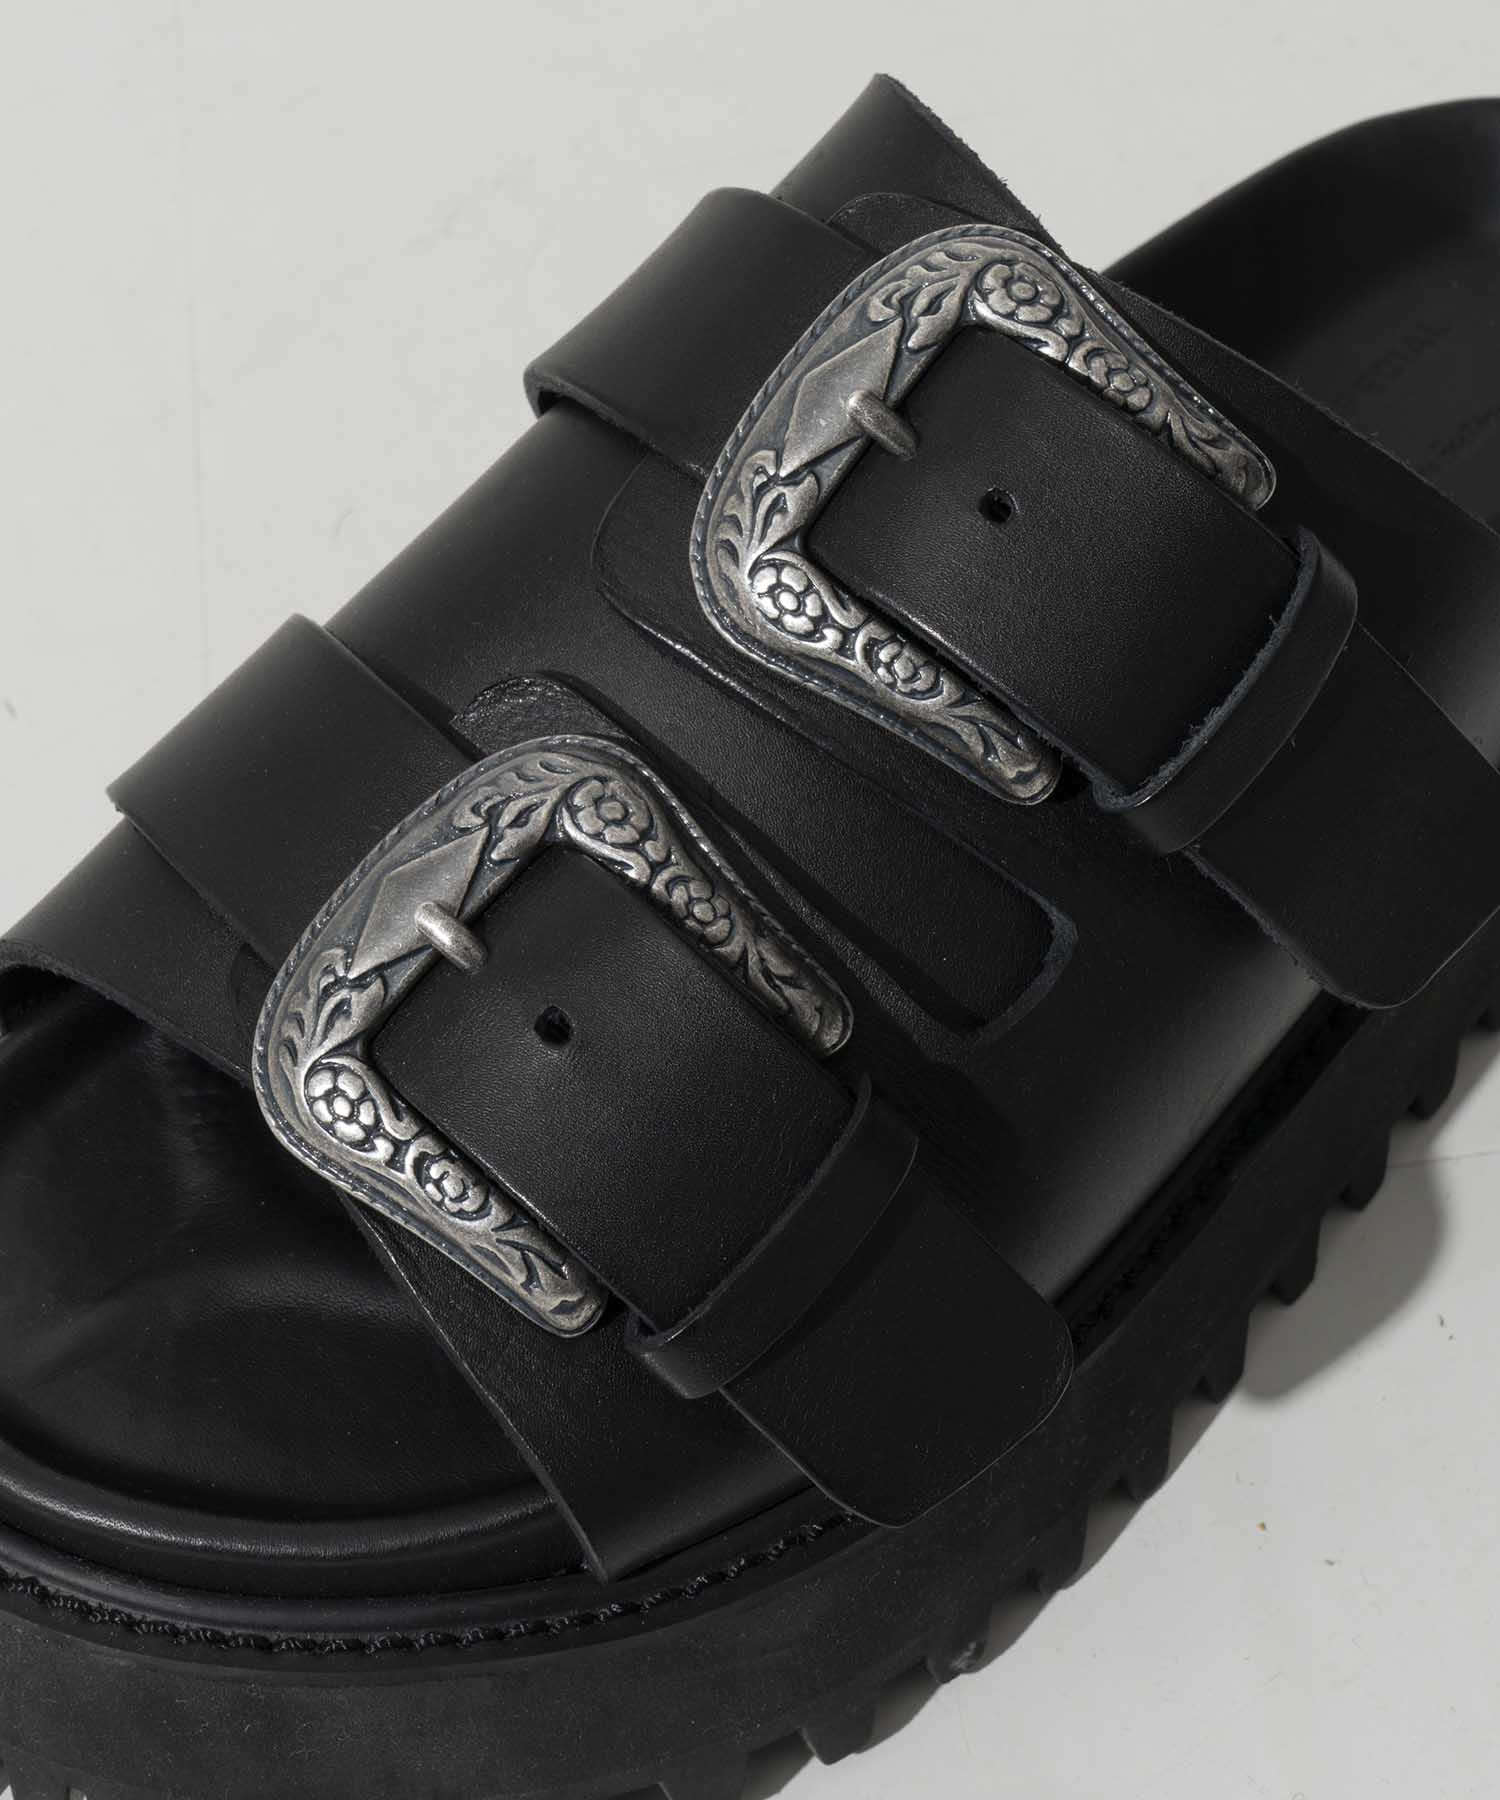 【SPECIAL SHOES FACTORY COLLABORATION】Italian Vibram Sole Double Monk Buckle Sandal Made In TOKYO